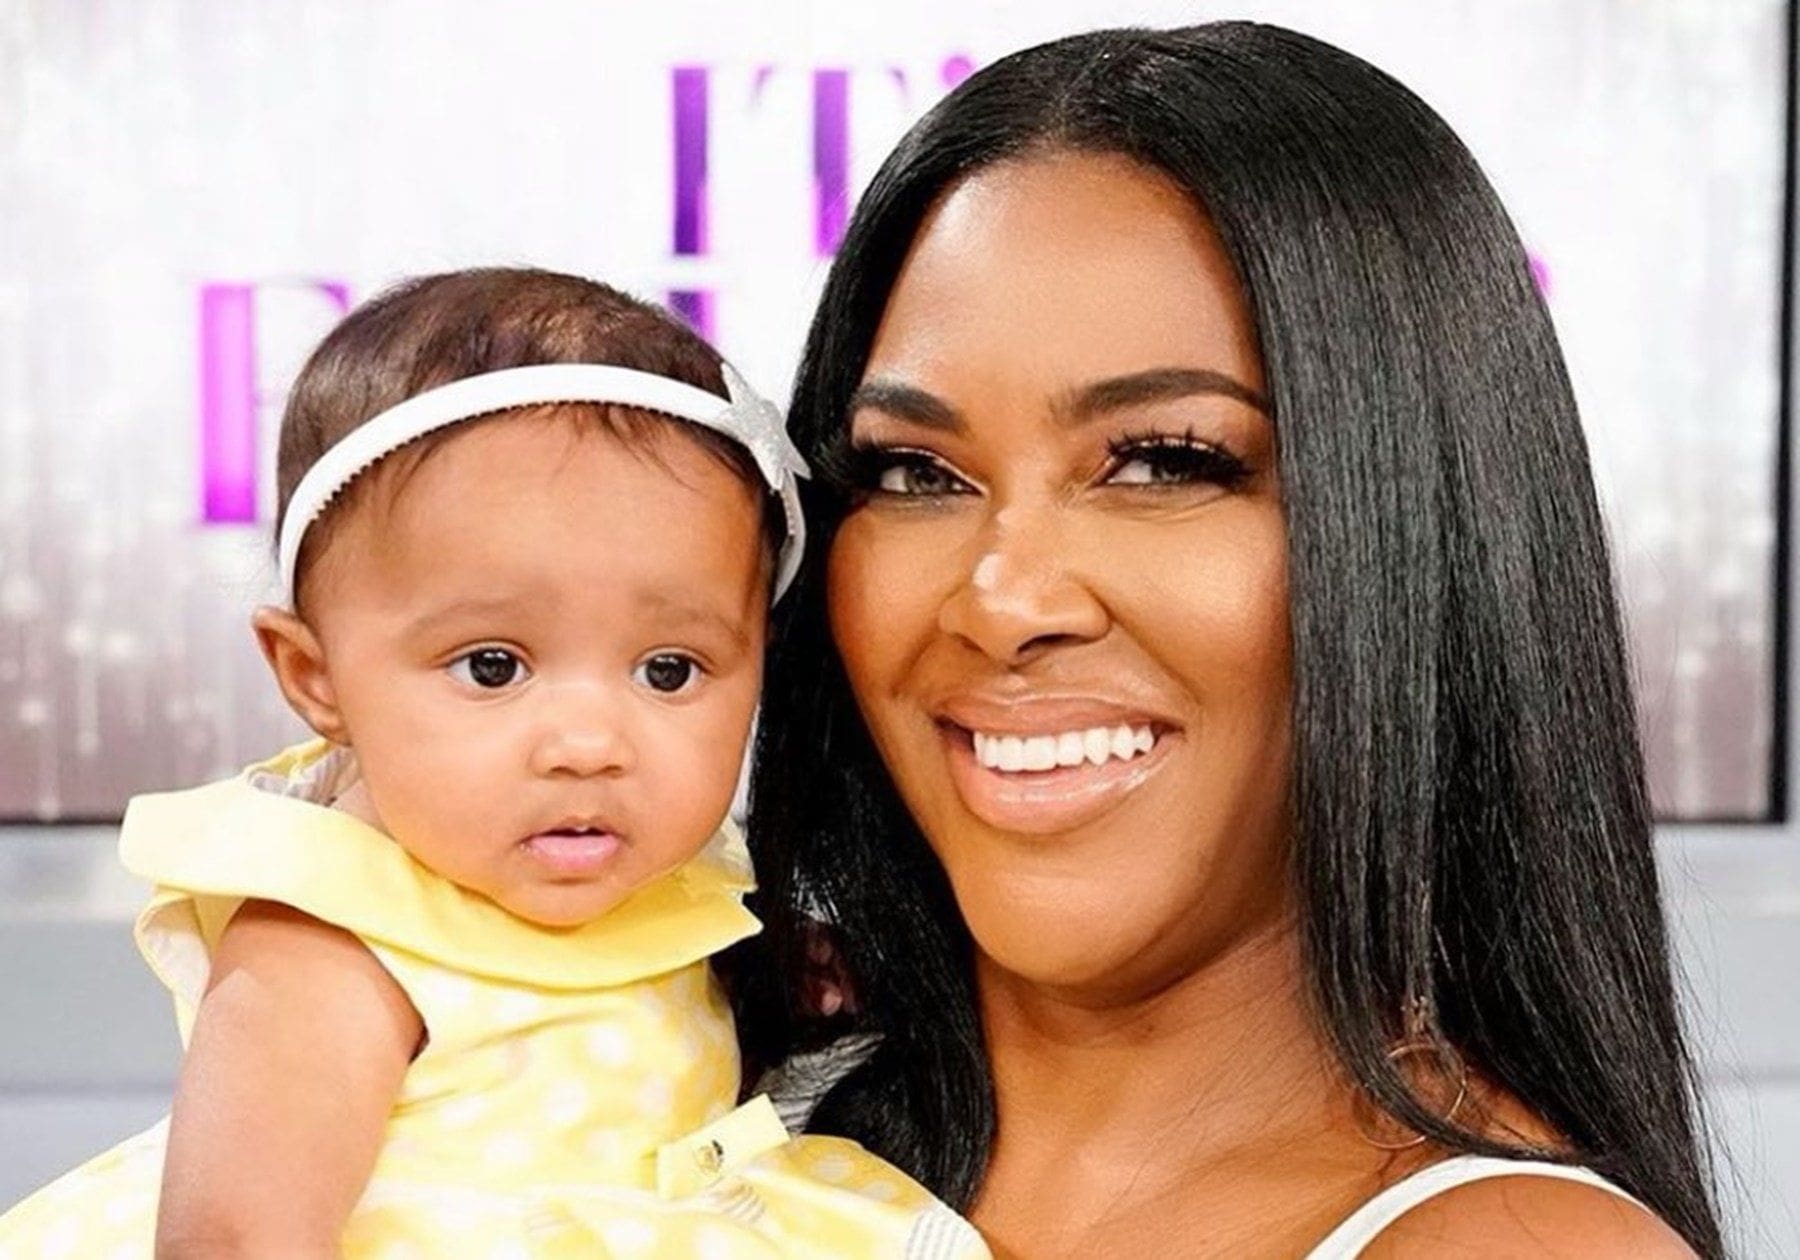 Kenya Moore’s Baby Girl Brooklyn Daly’s Recent Photo Will Bring A Smile To Your Face